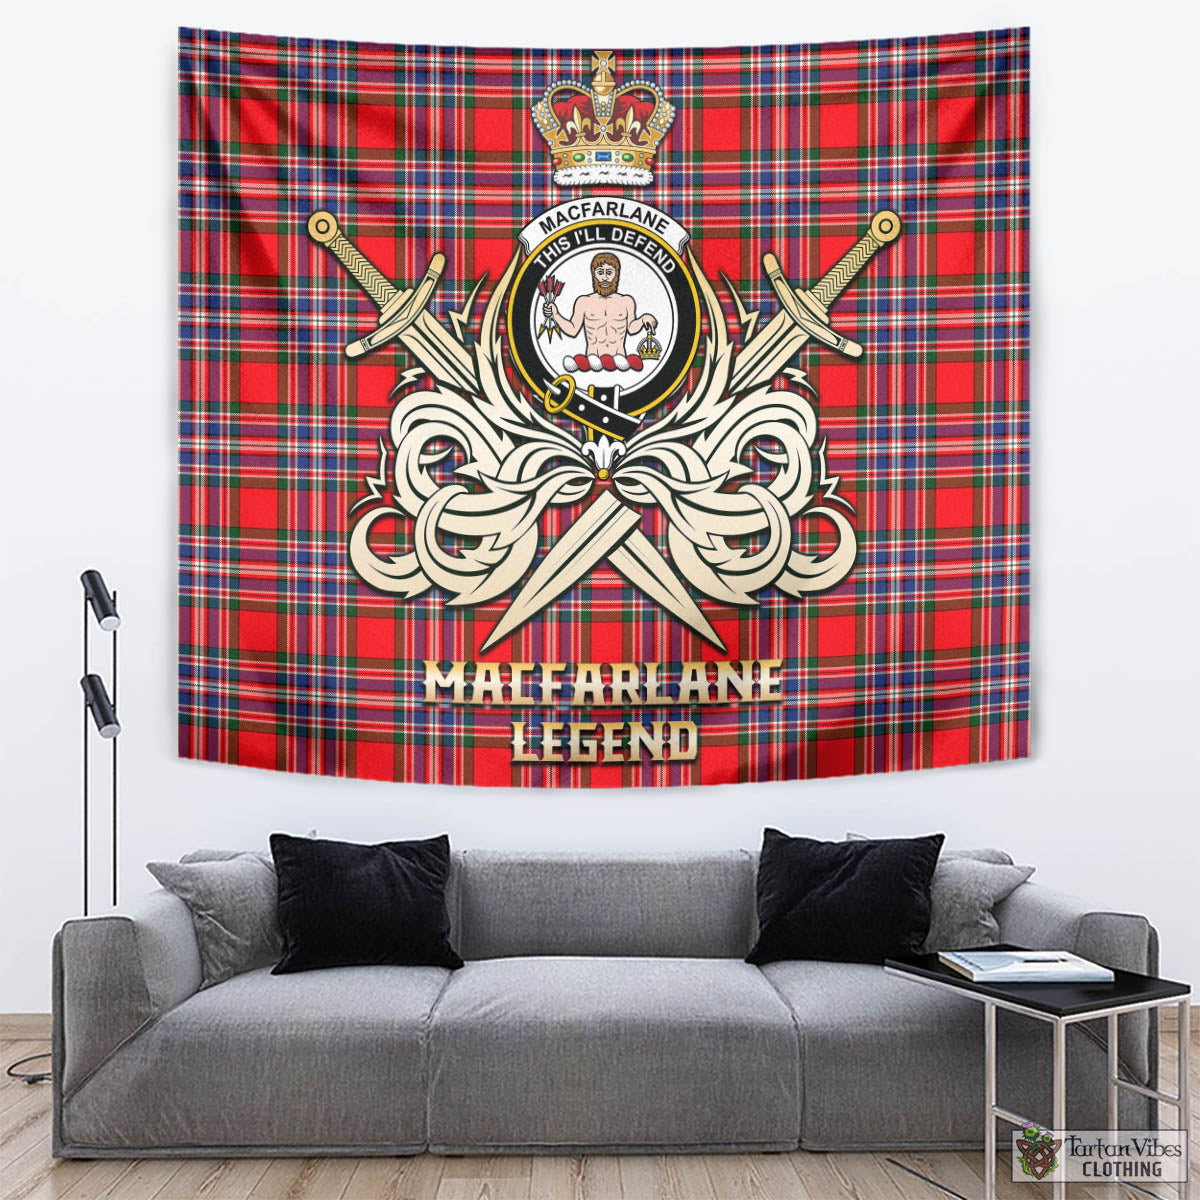 Tartan Vibes Clothing MacFarlane Modern Tartan Tapestry with Clan Crest and the Golden Sword of Courageous Legacy